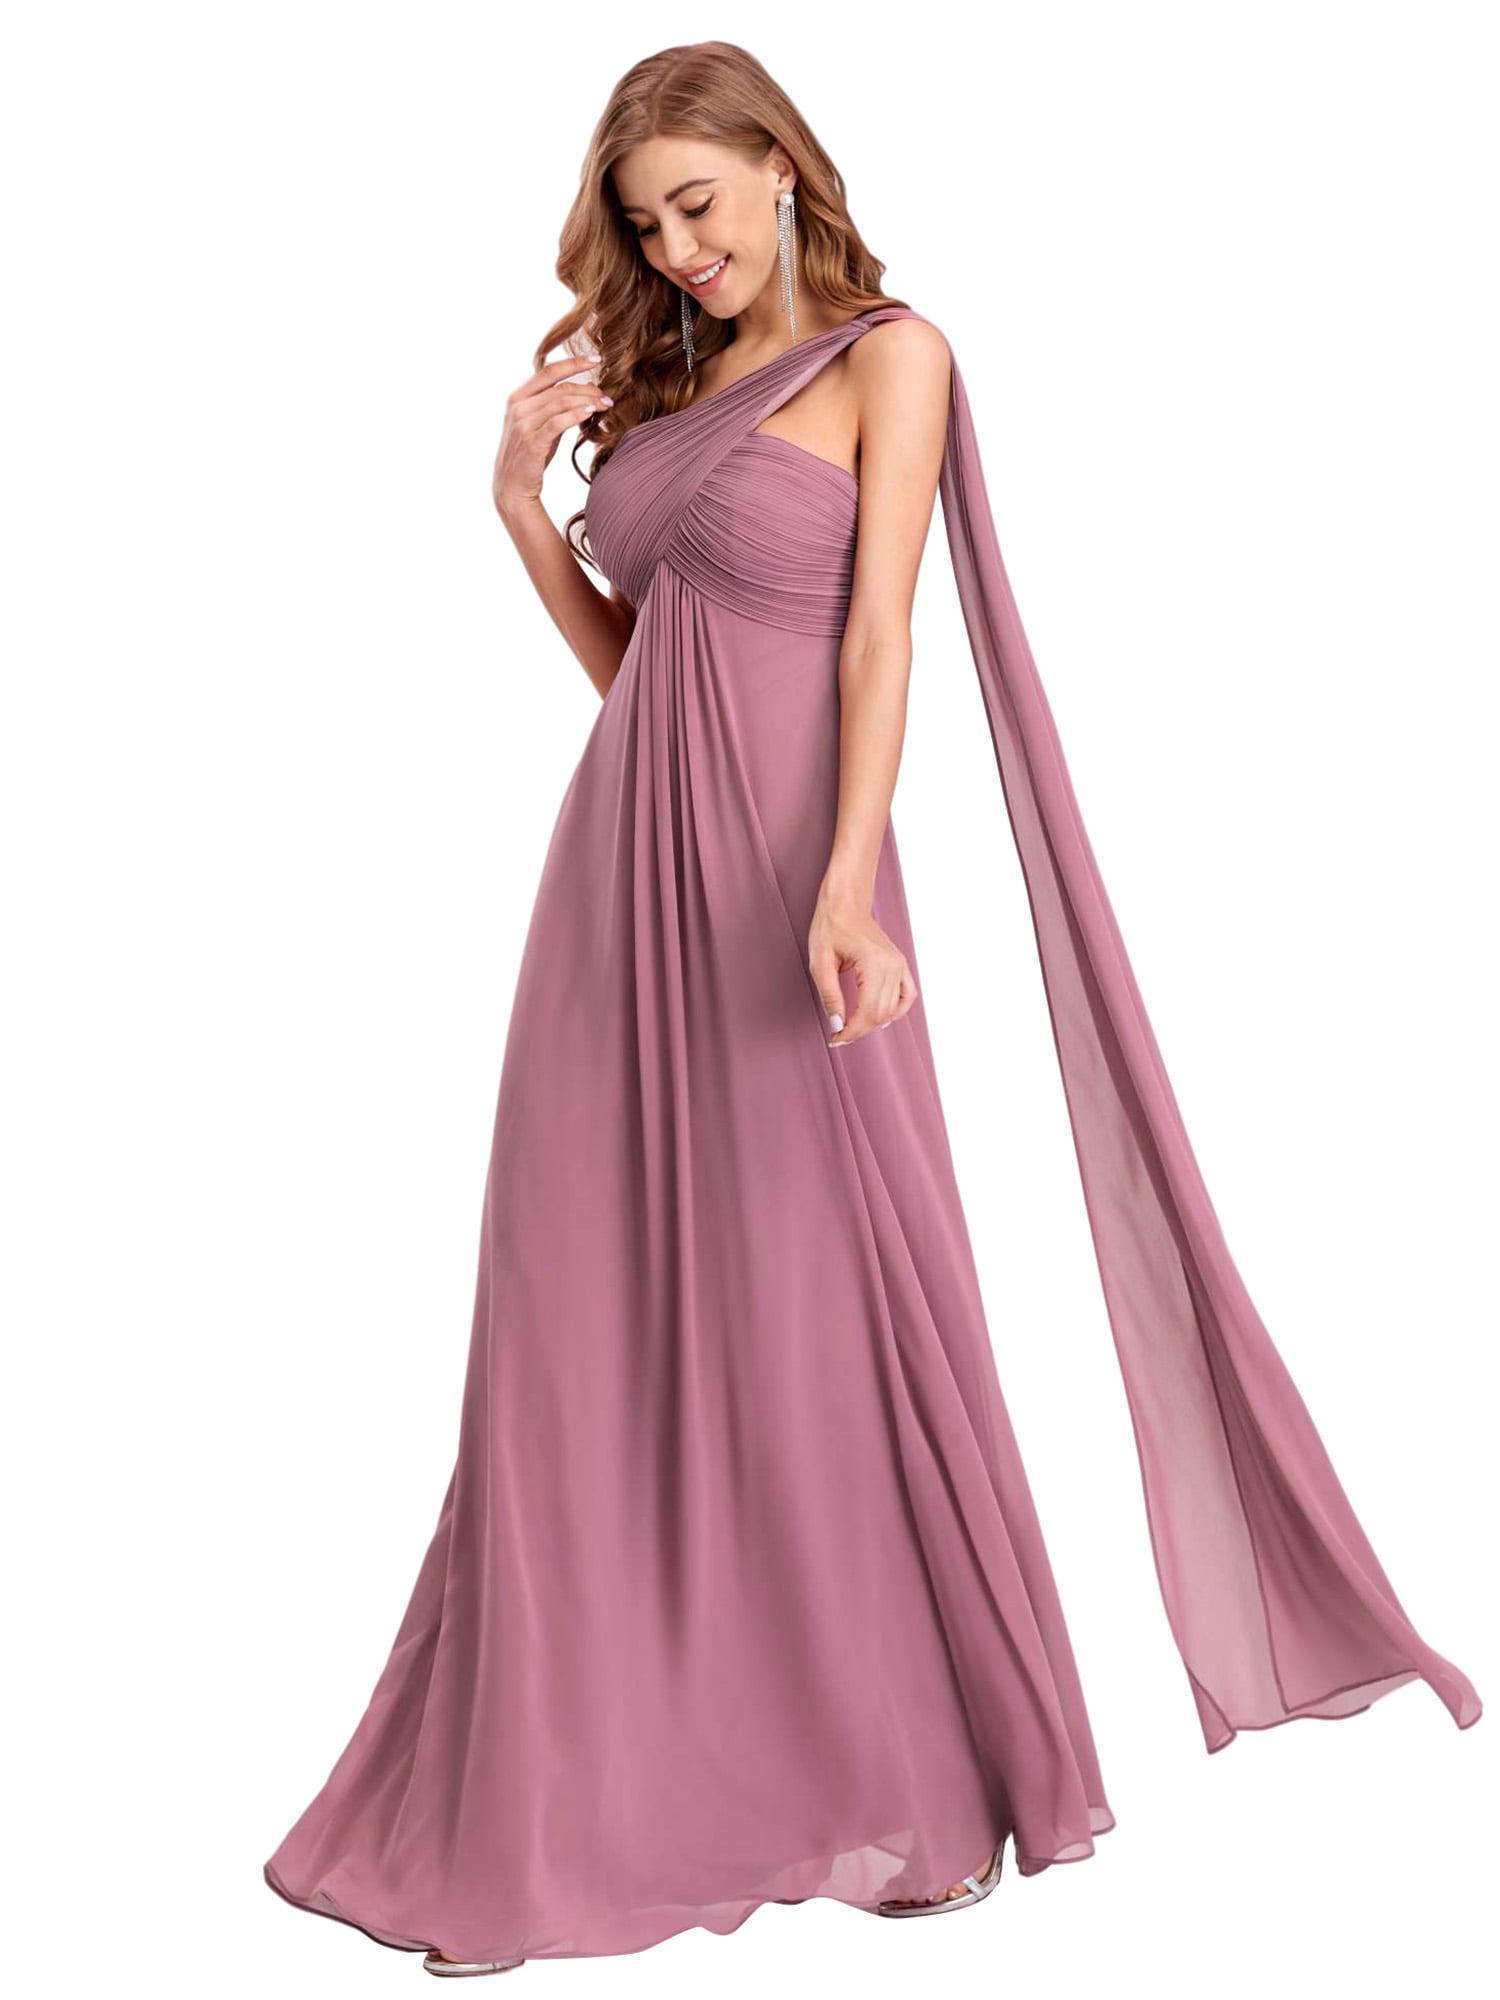 Plus Size US Long One-shoulder Formal Prom Bridesmaid Wedding Party Dresses 8237